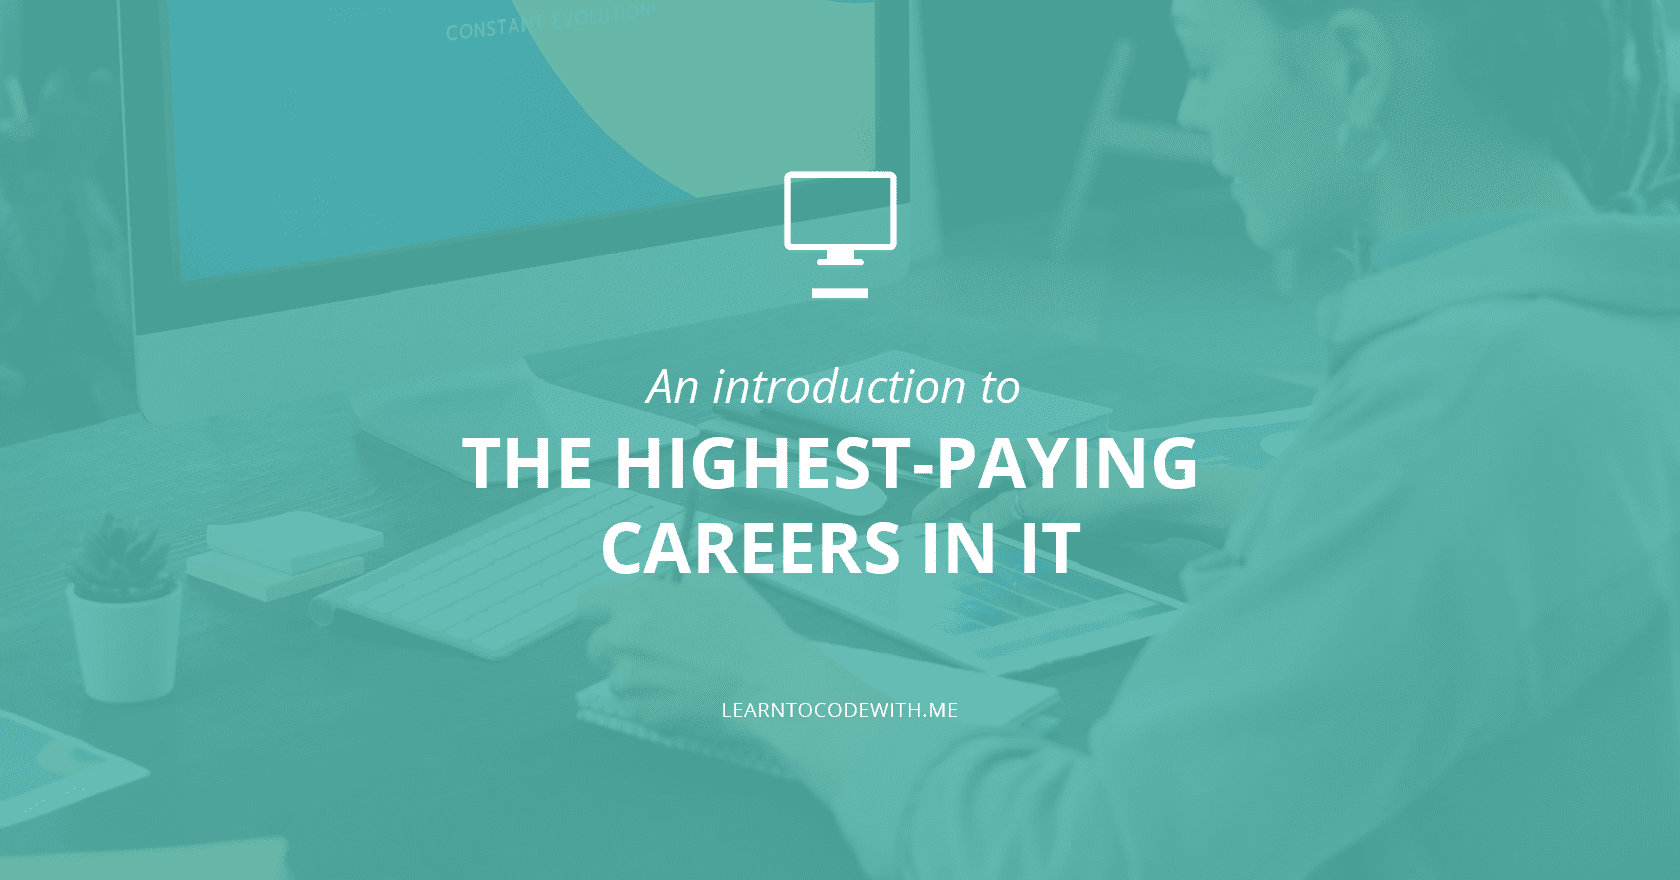 Highest-paying careers in IT